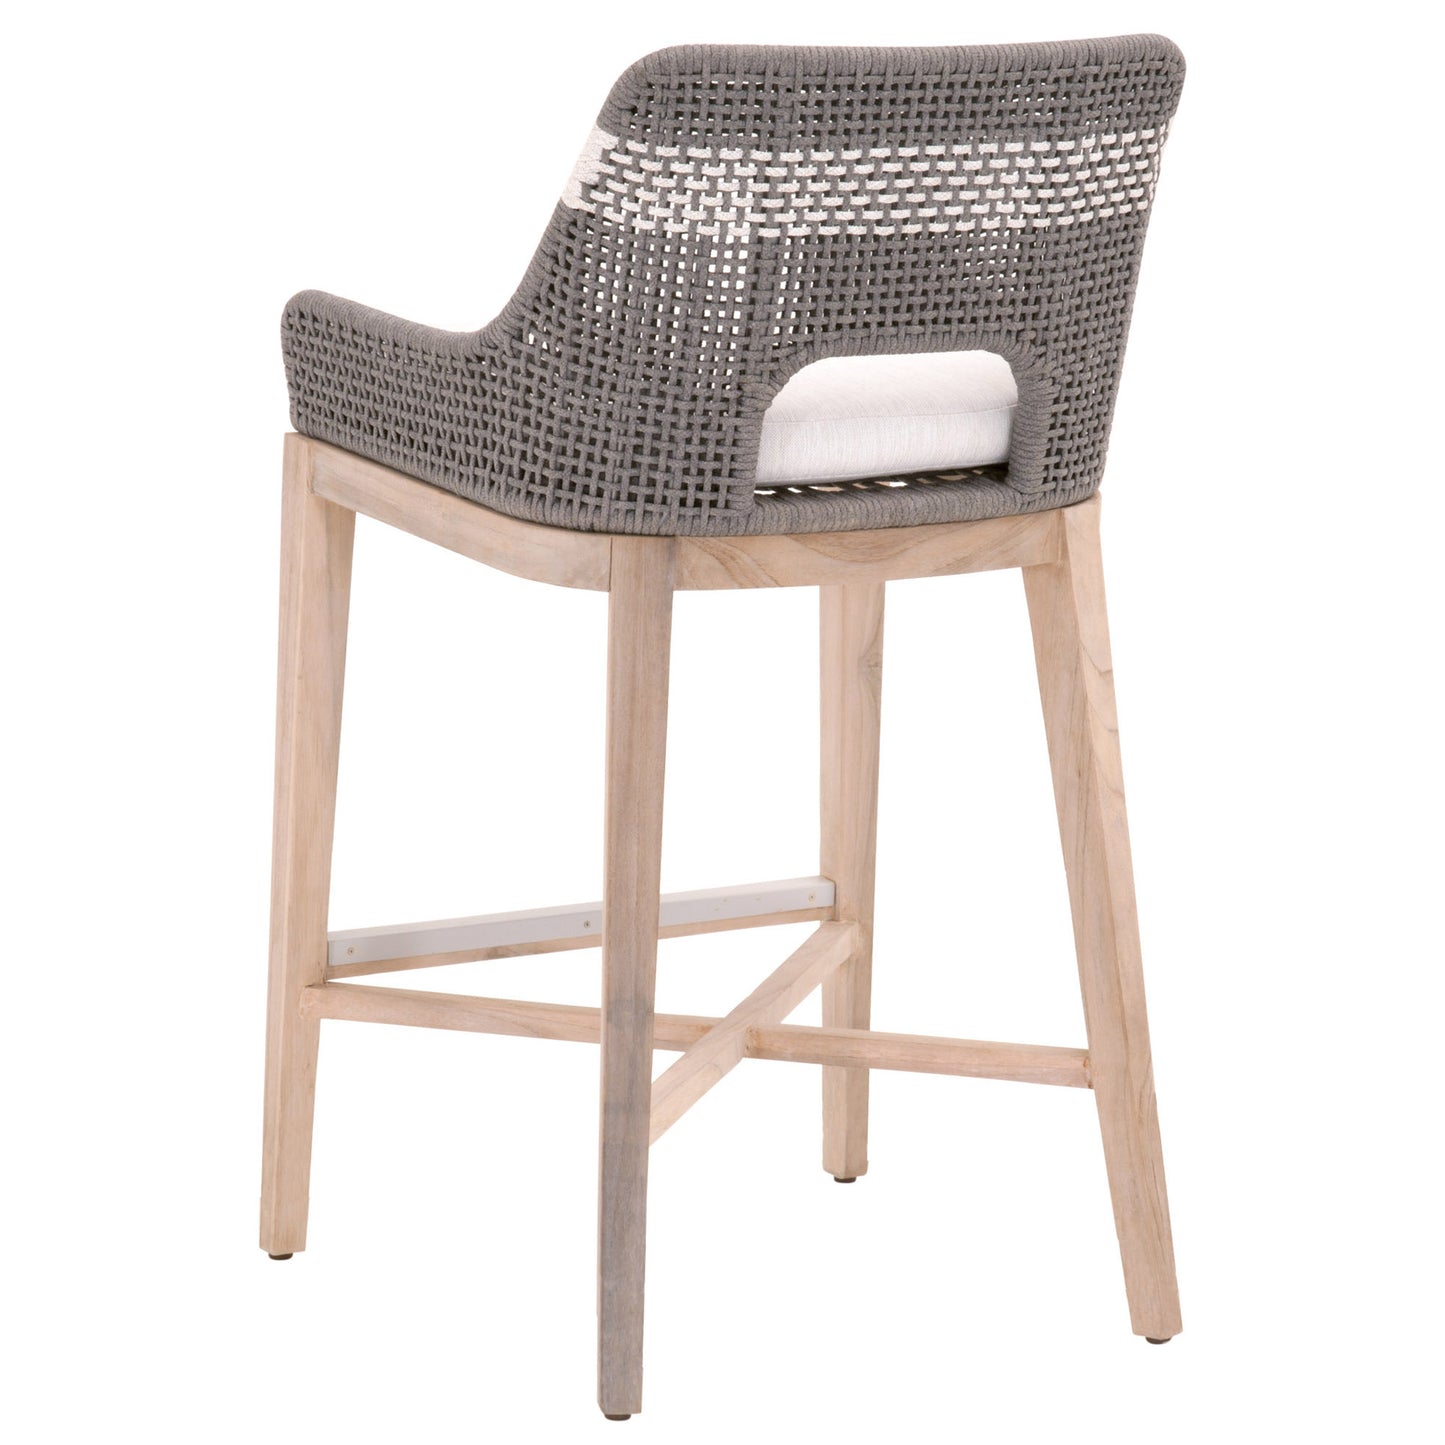 Interwoven Rope Bar Stool with Stretcher and Cross Support